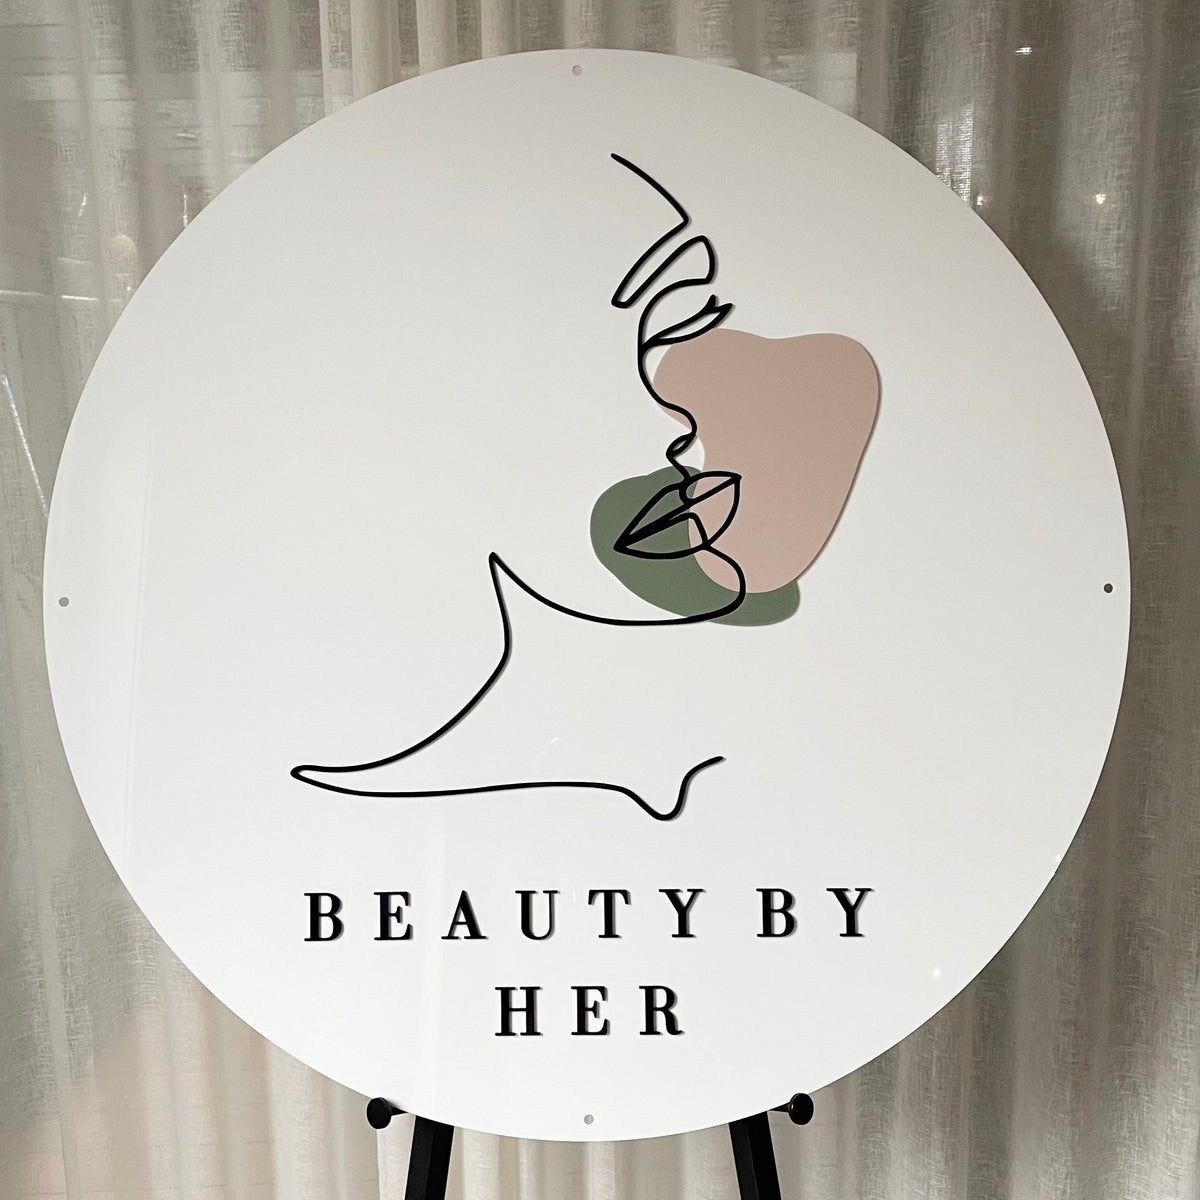 beauty business sign